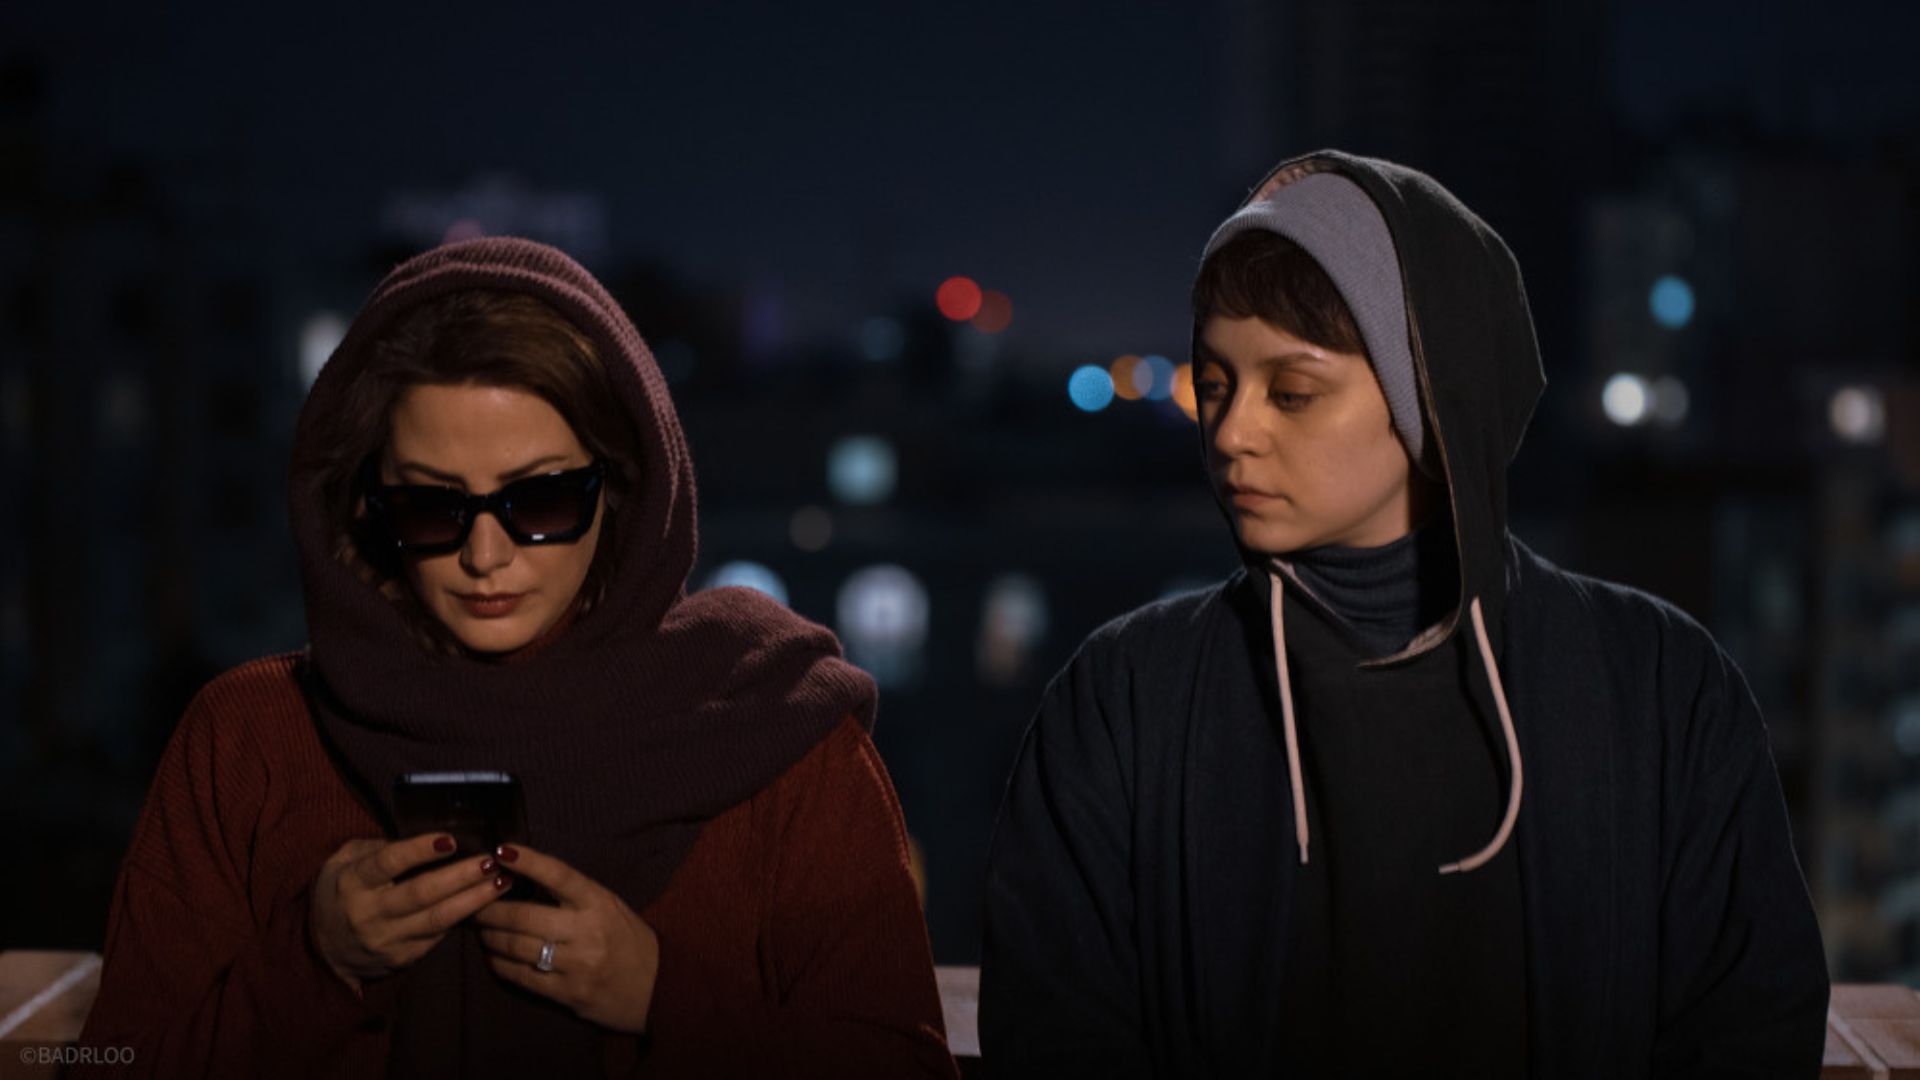 two woman with hoods up on street with one woman wearing sunglasses looking down at phone